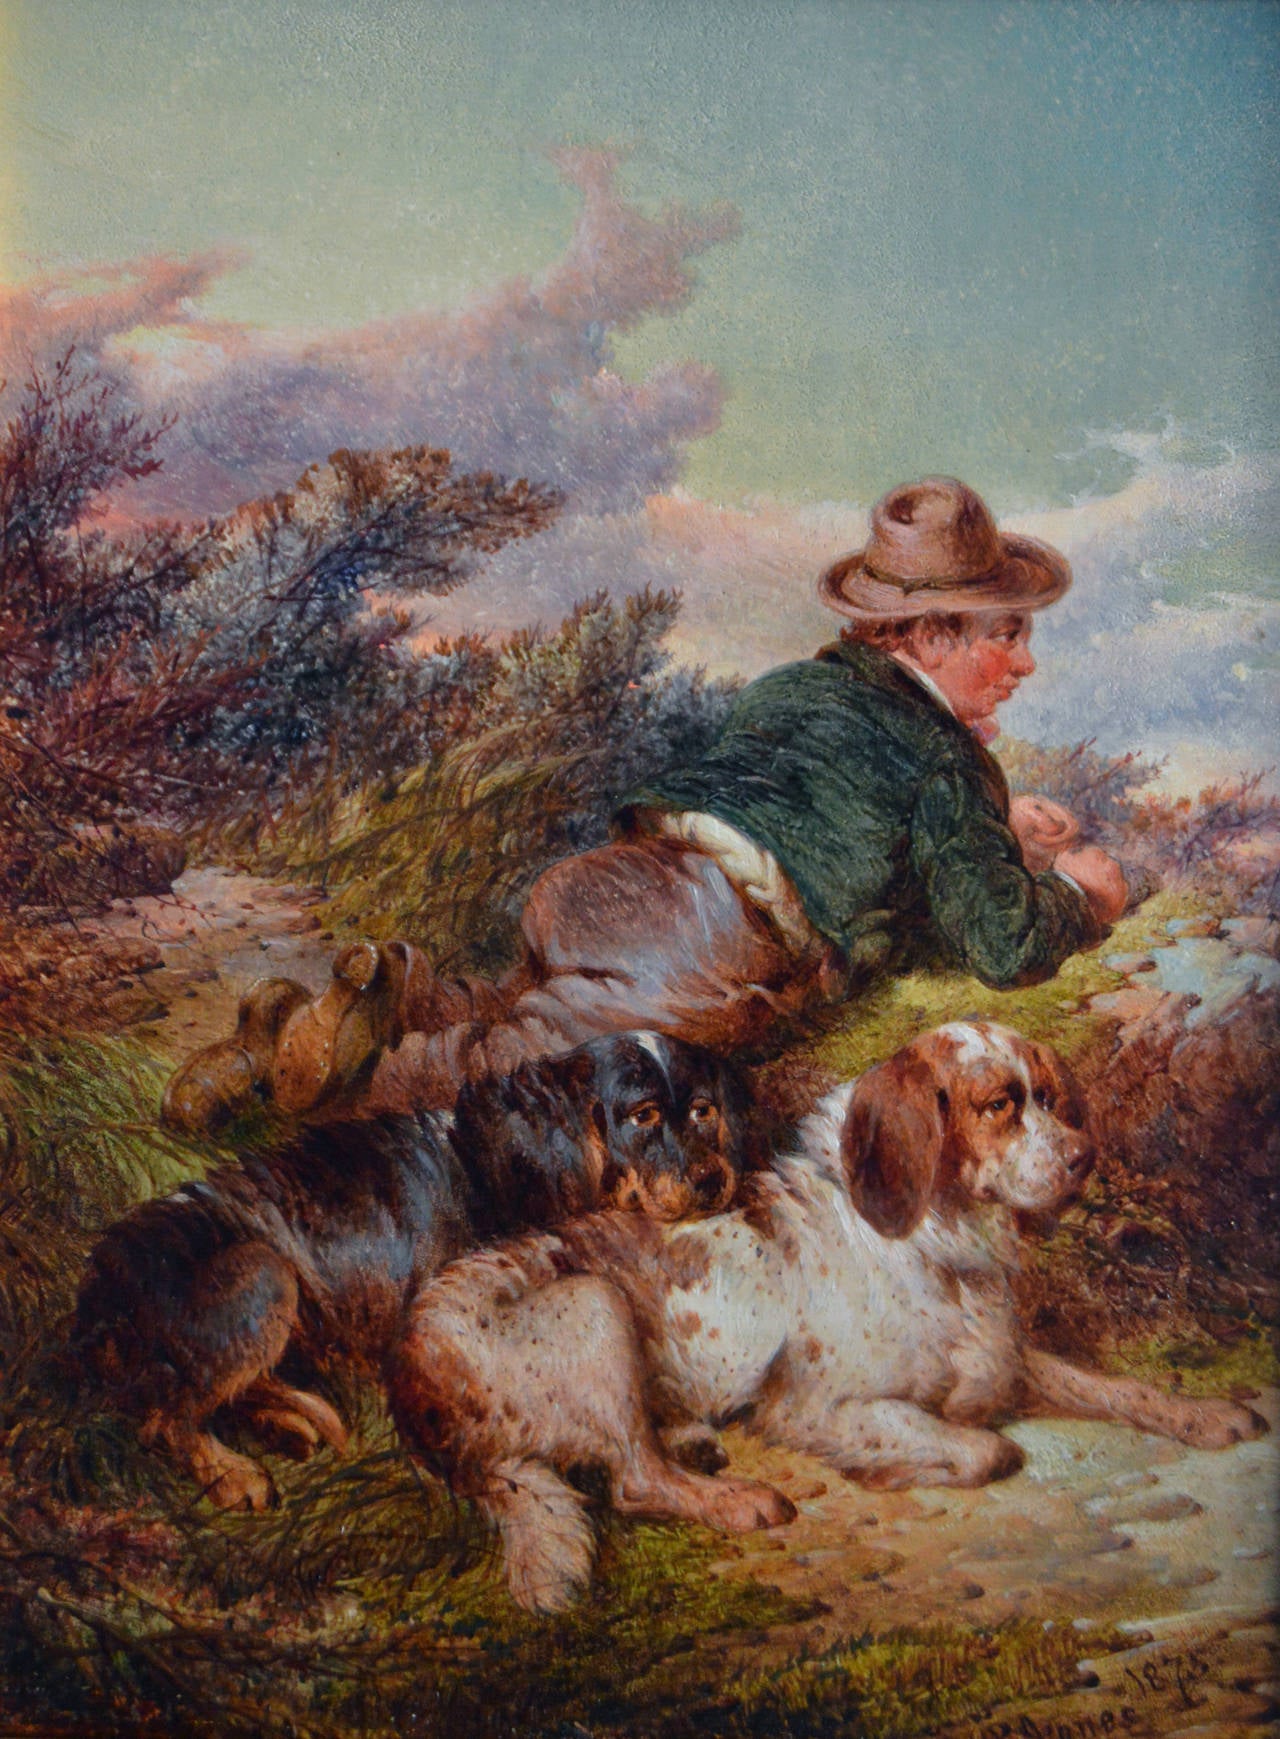 Paul Jones 
British, (fl. 1856-1888)
Faithful Companions 
Oil on panel, signed & dated 1875
Image size: 7 inches x 5½ inches 
Size including frame: 14 inches x 12½ inches

Paul Jones was the son of the equestrian artist Samuel John Egbert